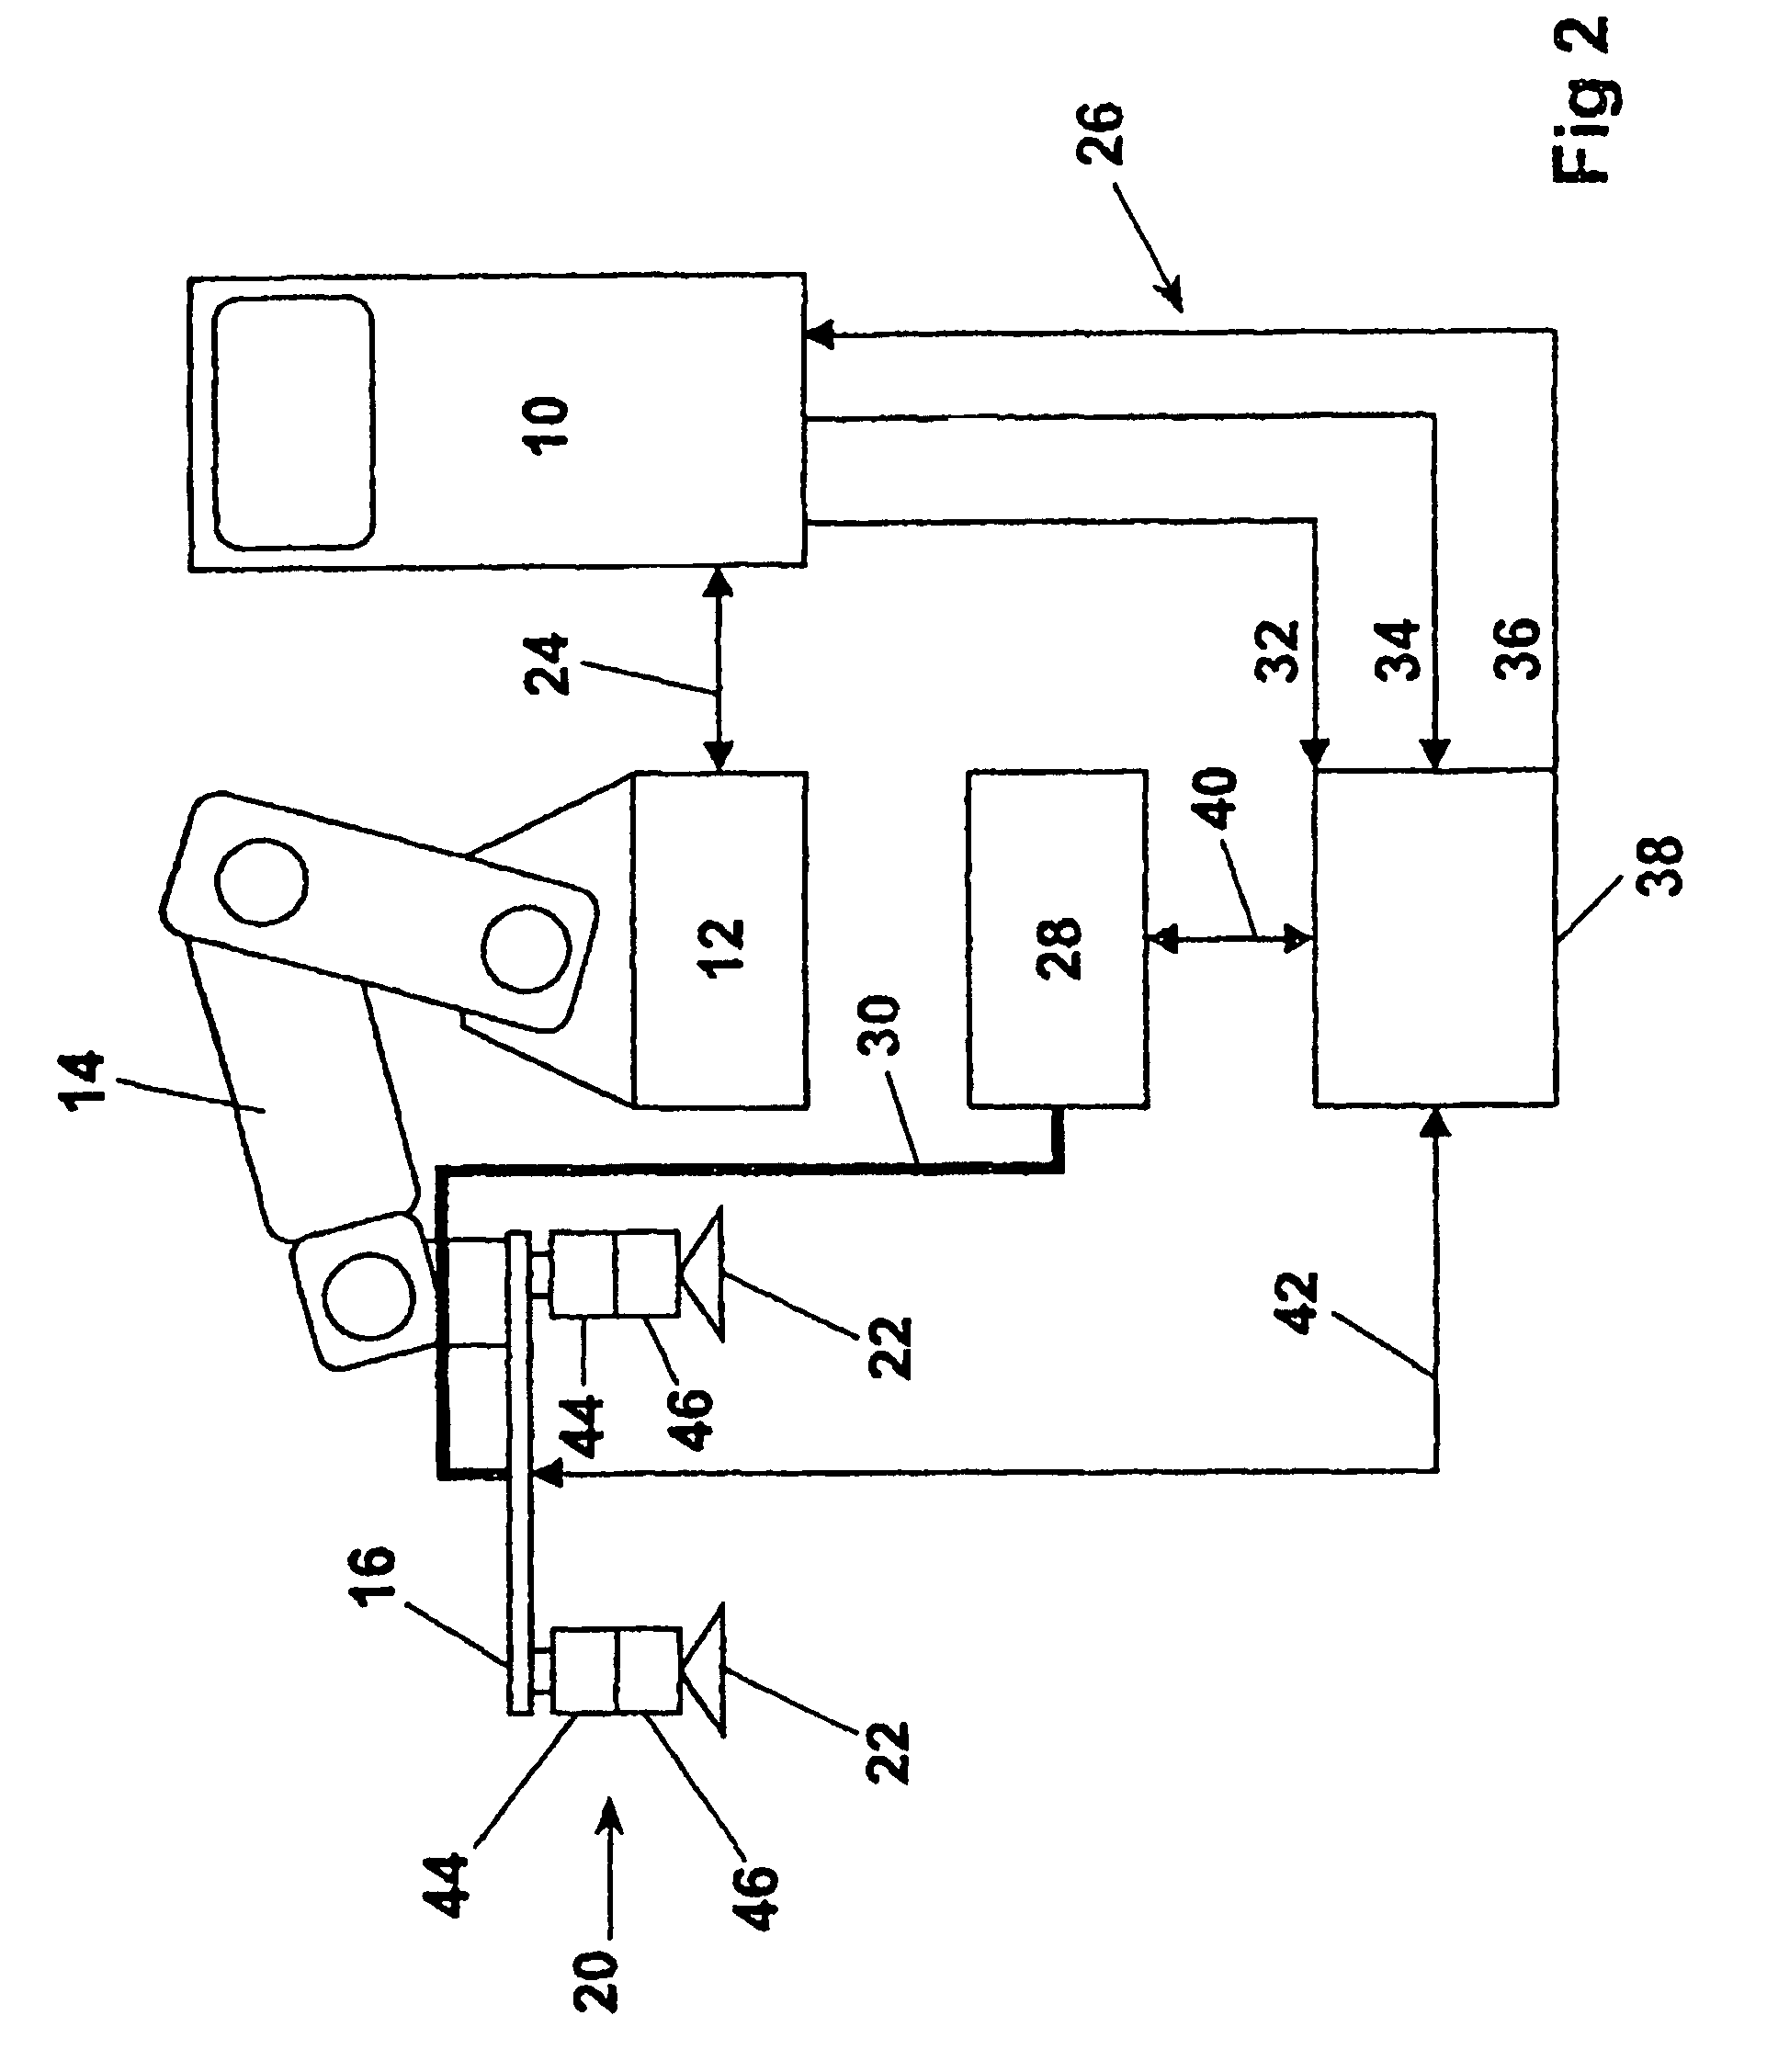 Method for operating a vacuum handling device